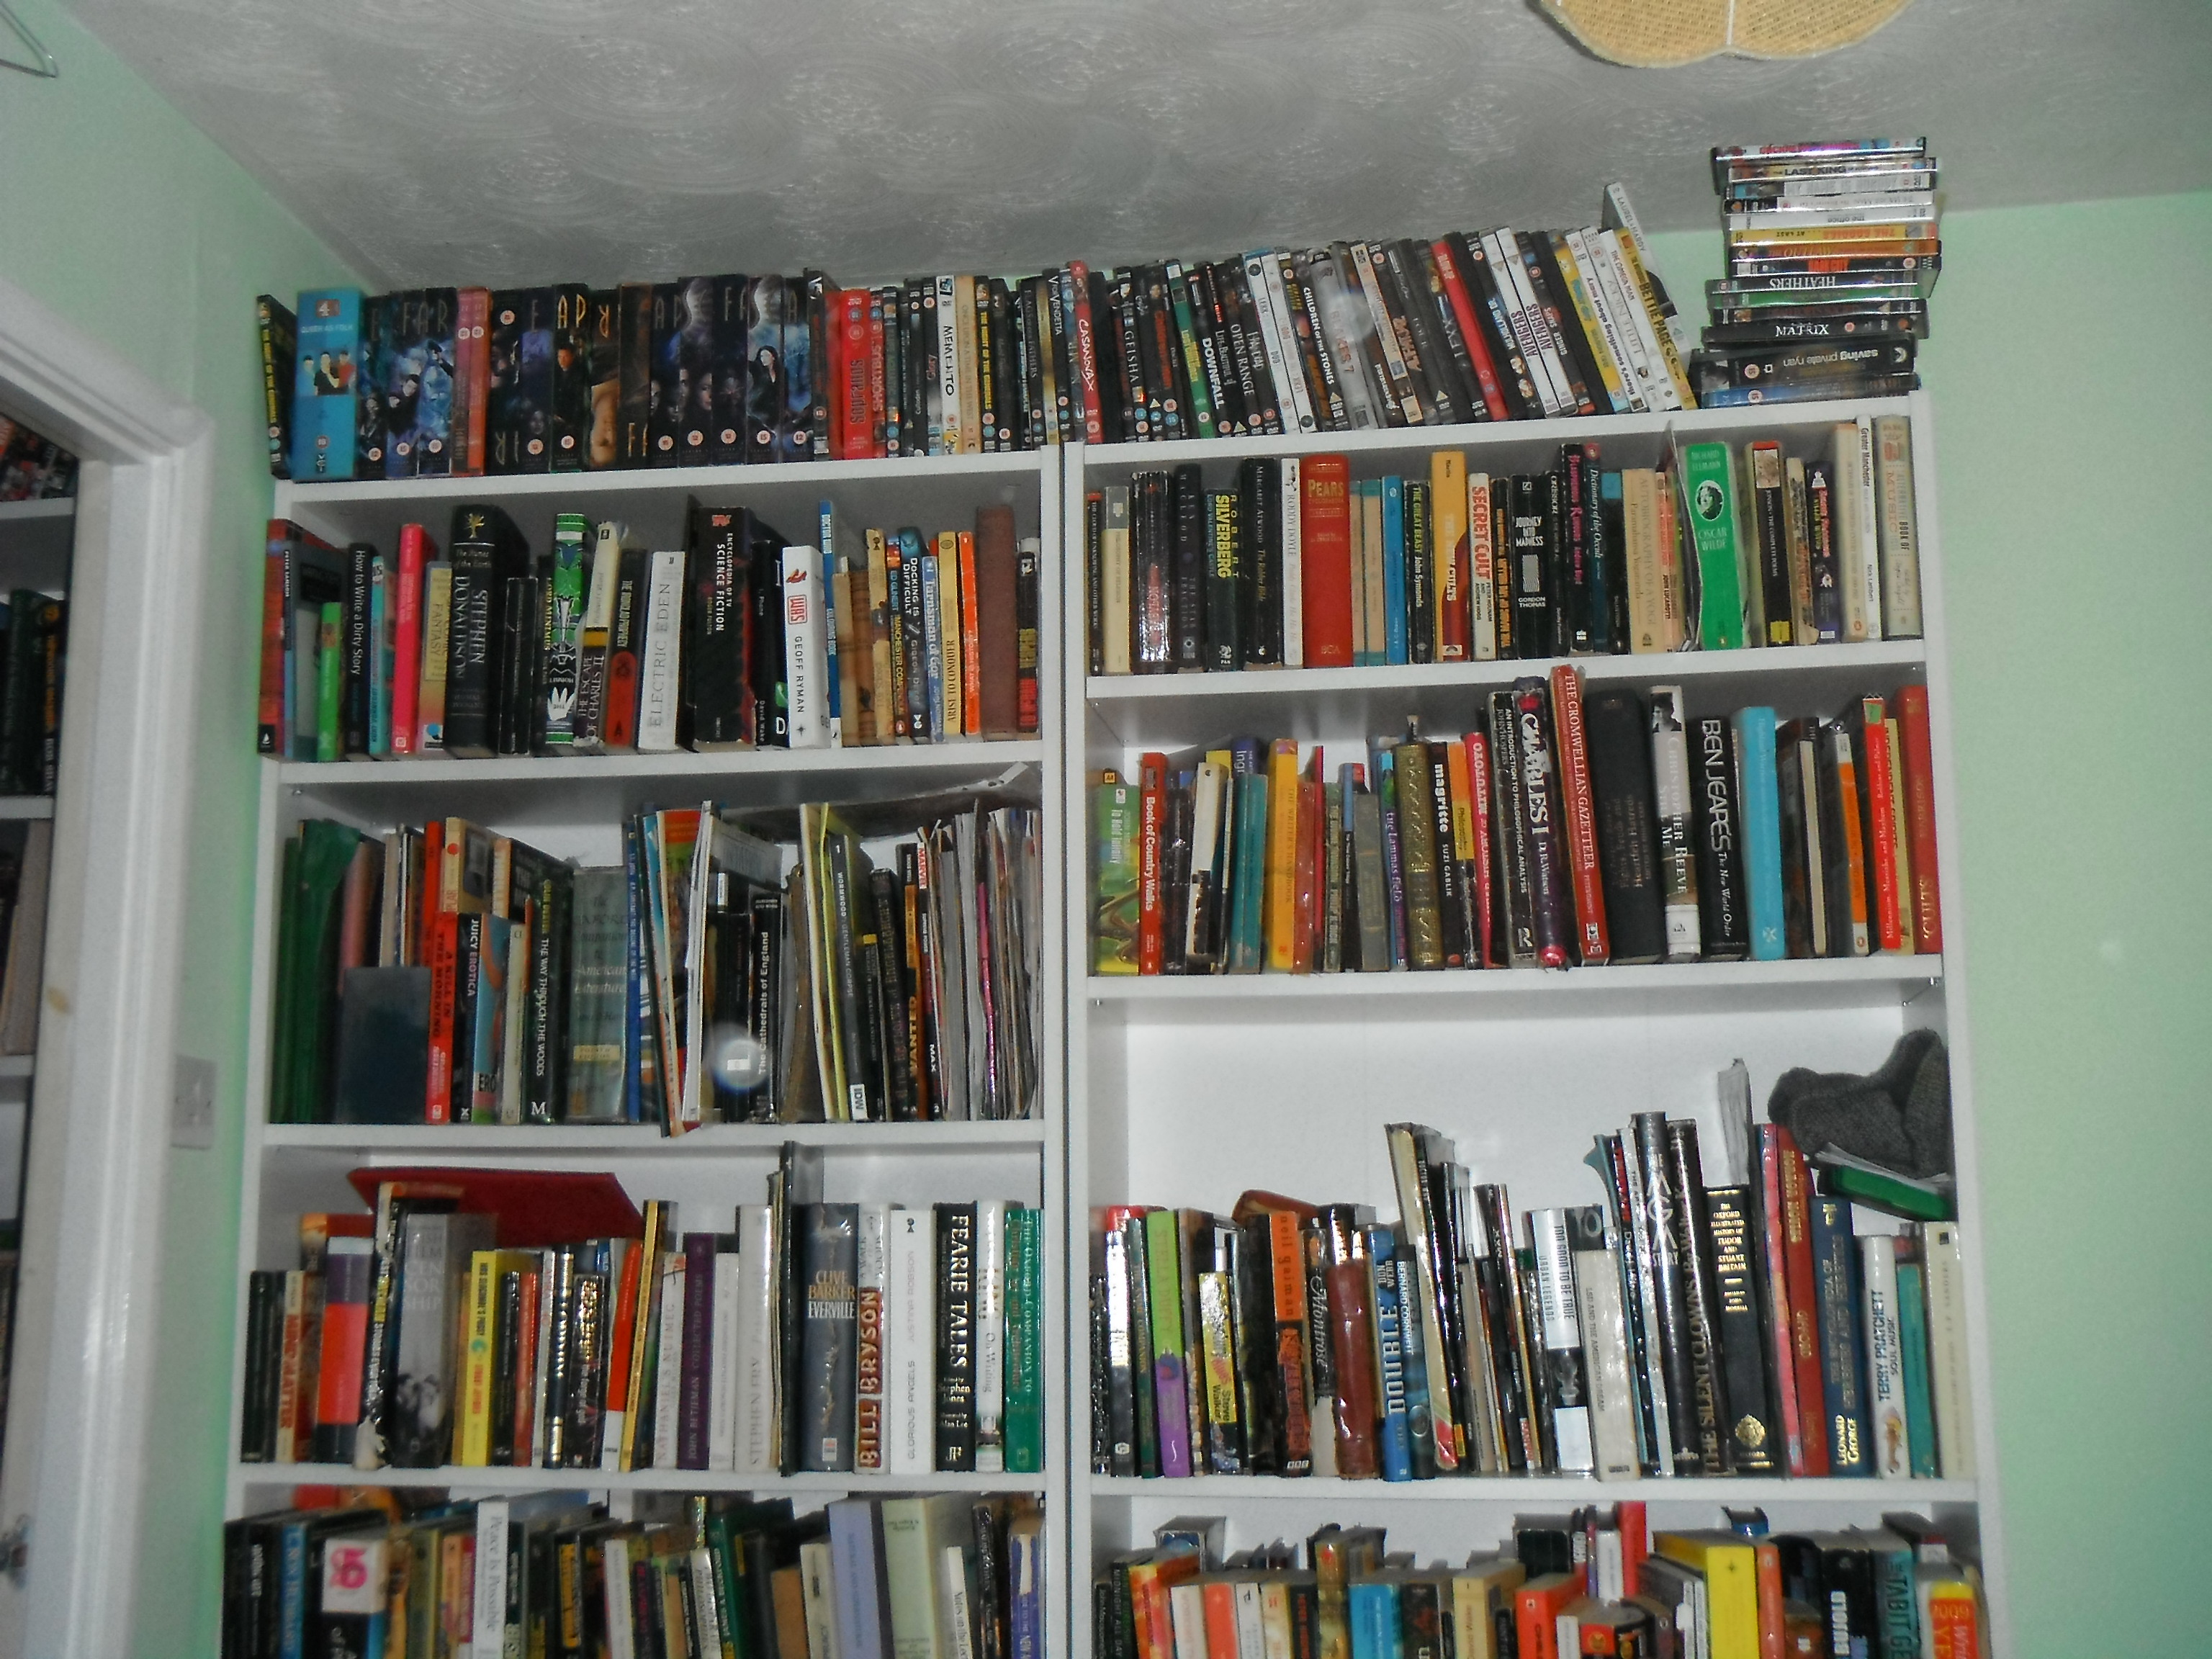 Photo taken by me – my book cases.